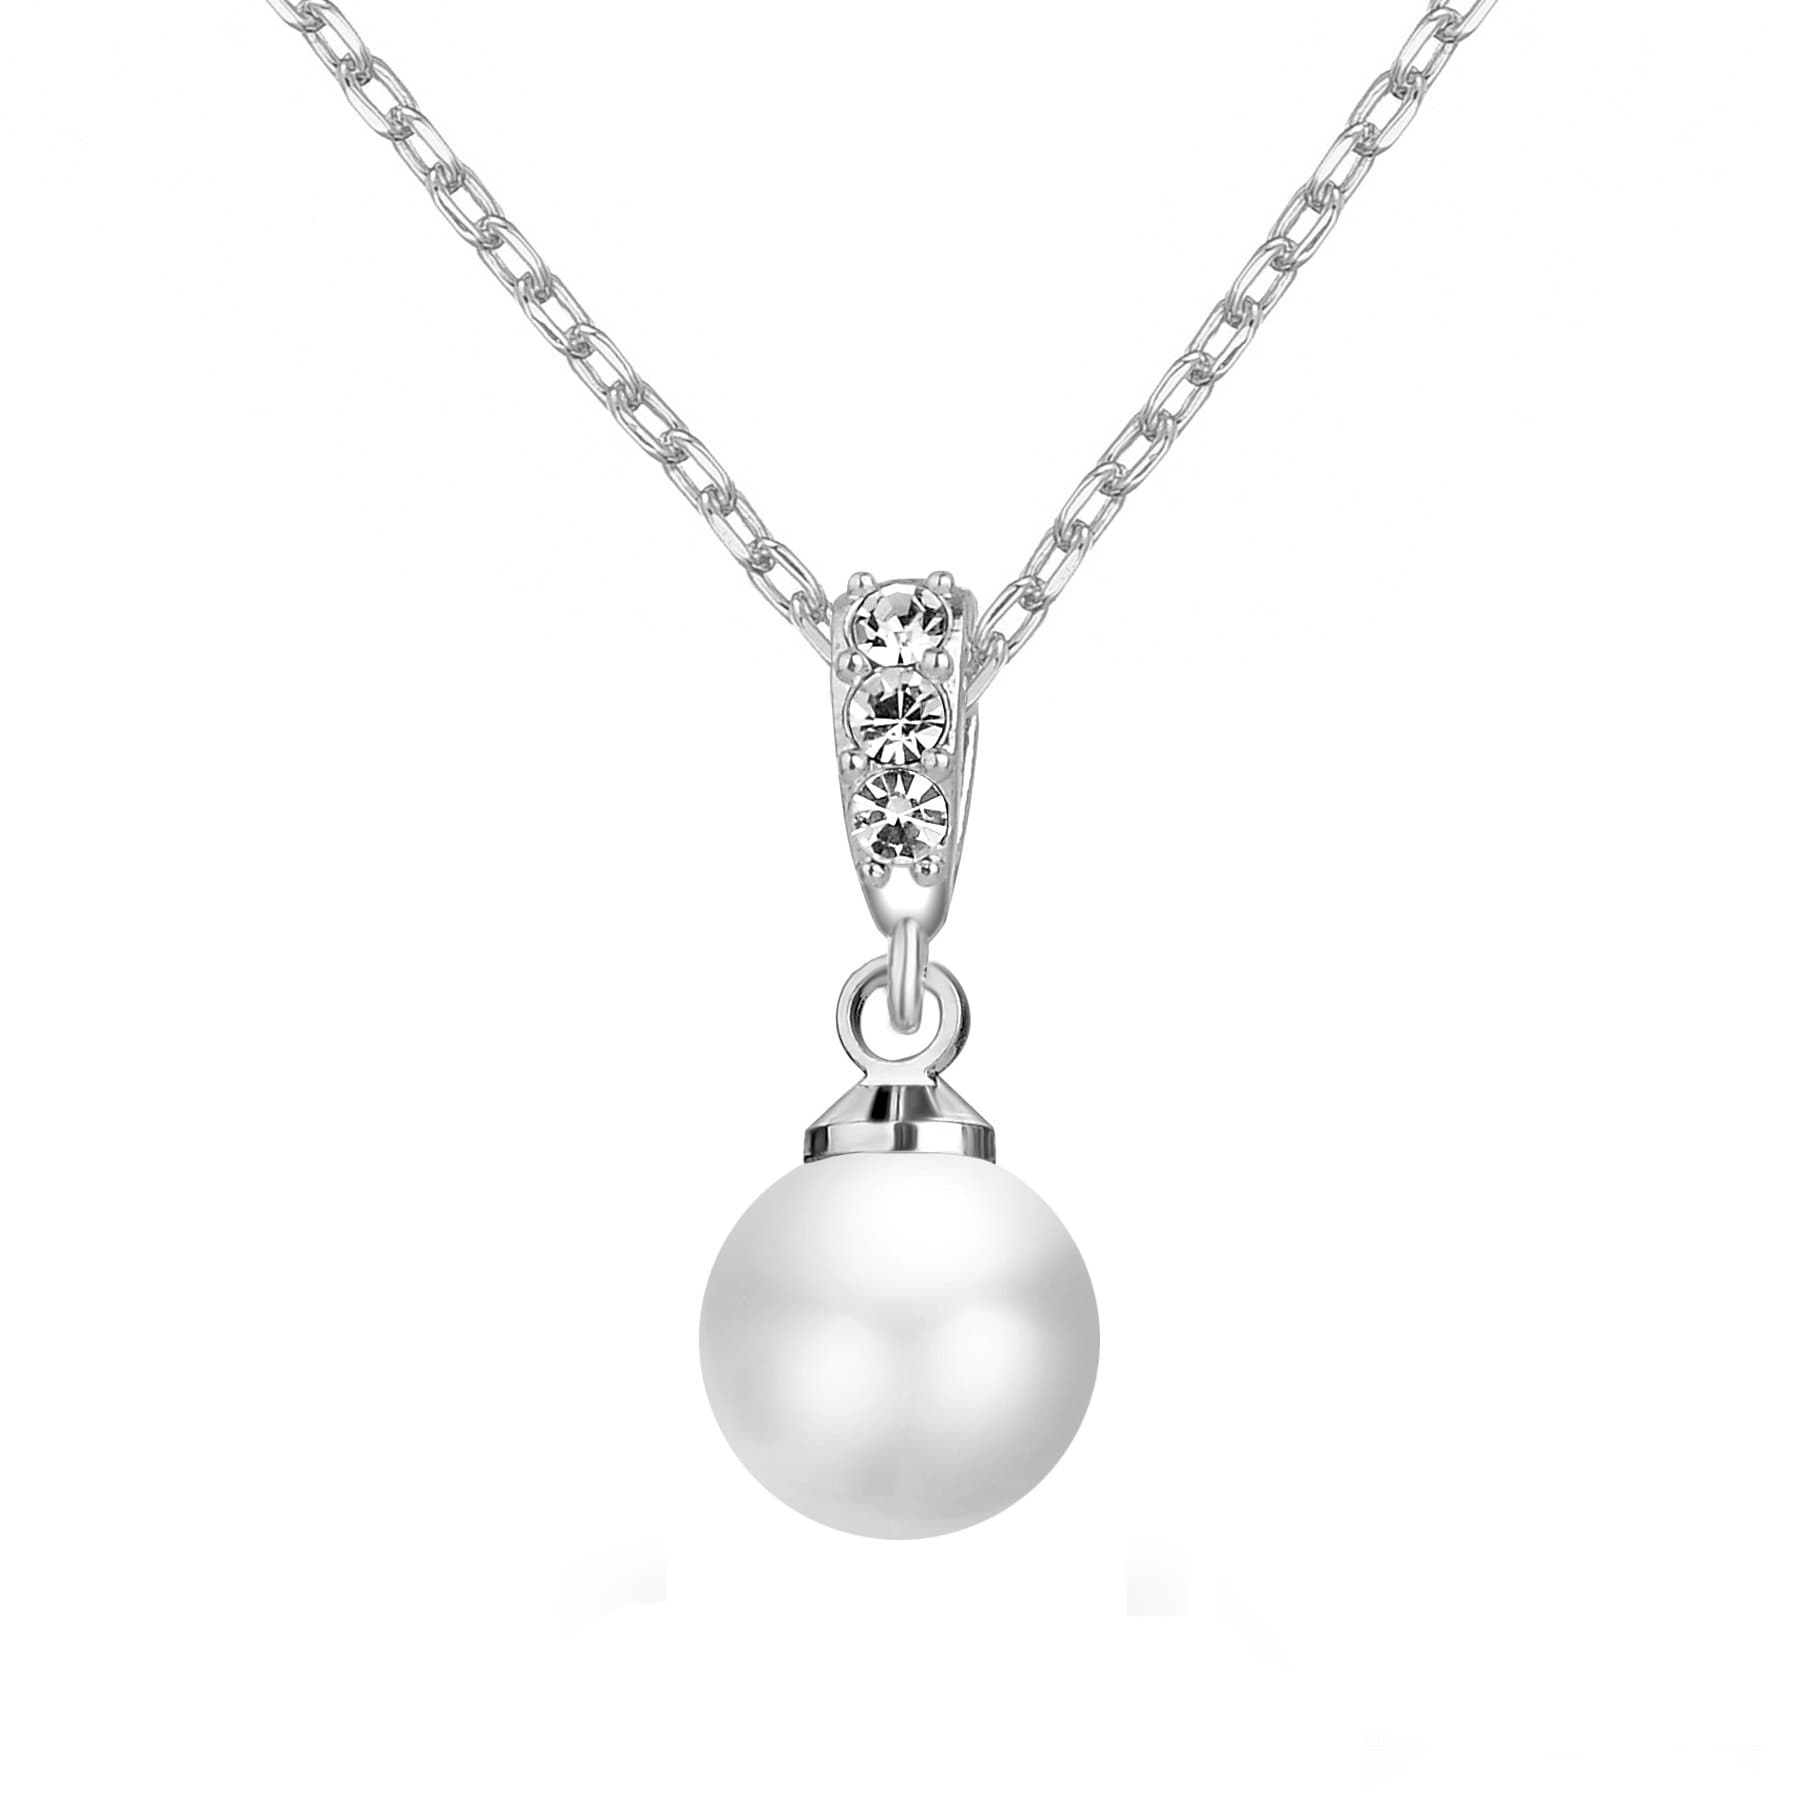 Silver Plated Pearl Drop Necklace Created with Zircondia® Crystals by Philip Jones Jewellery